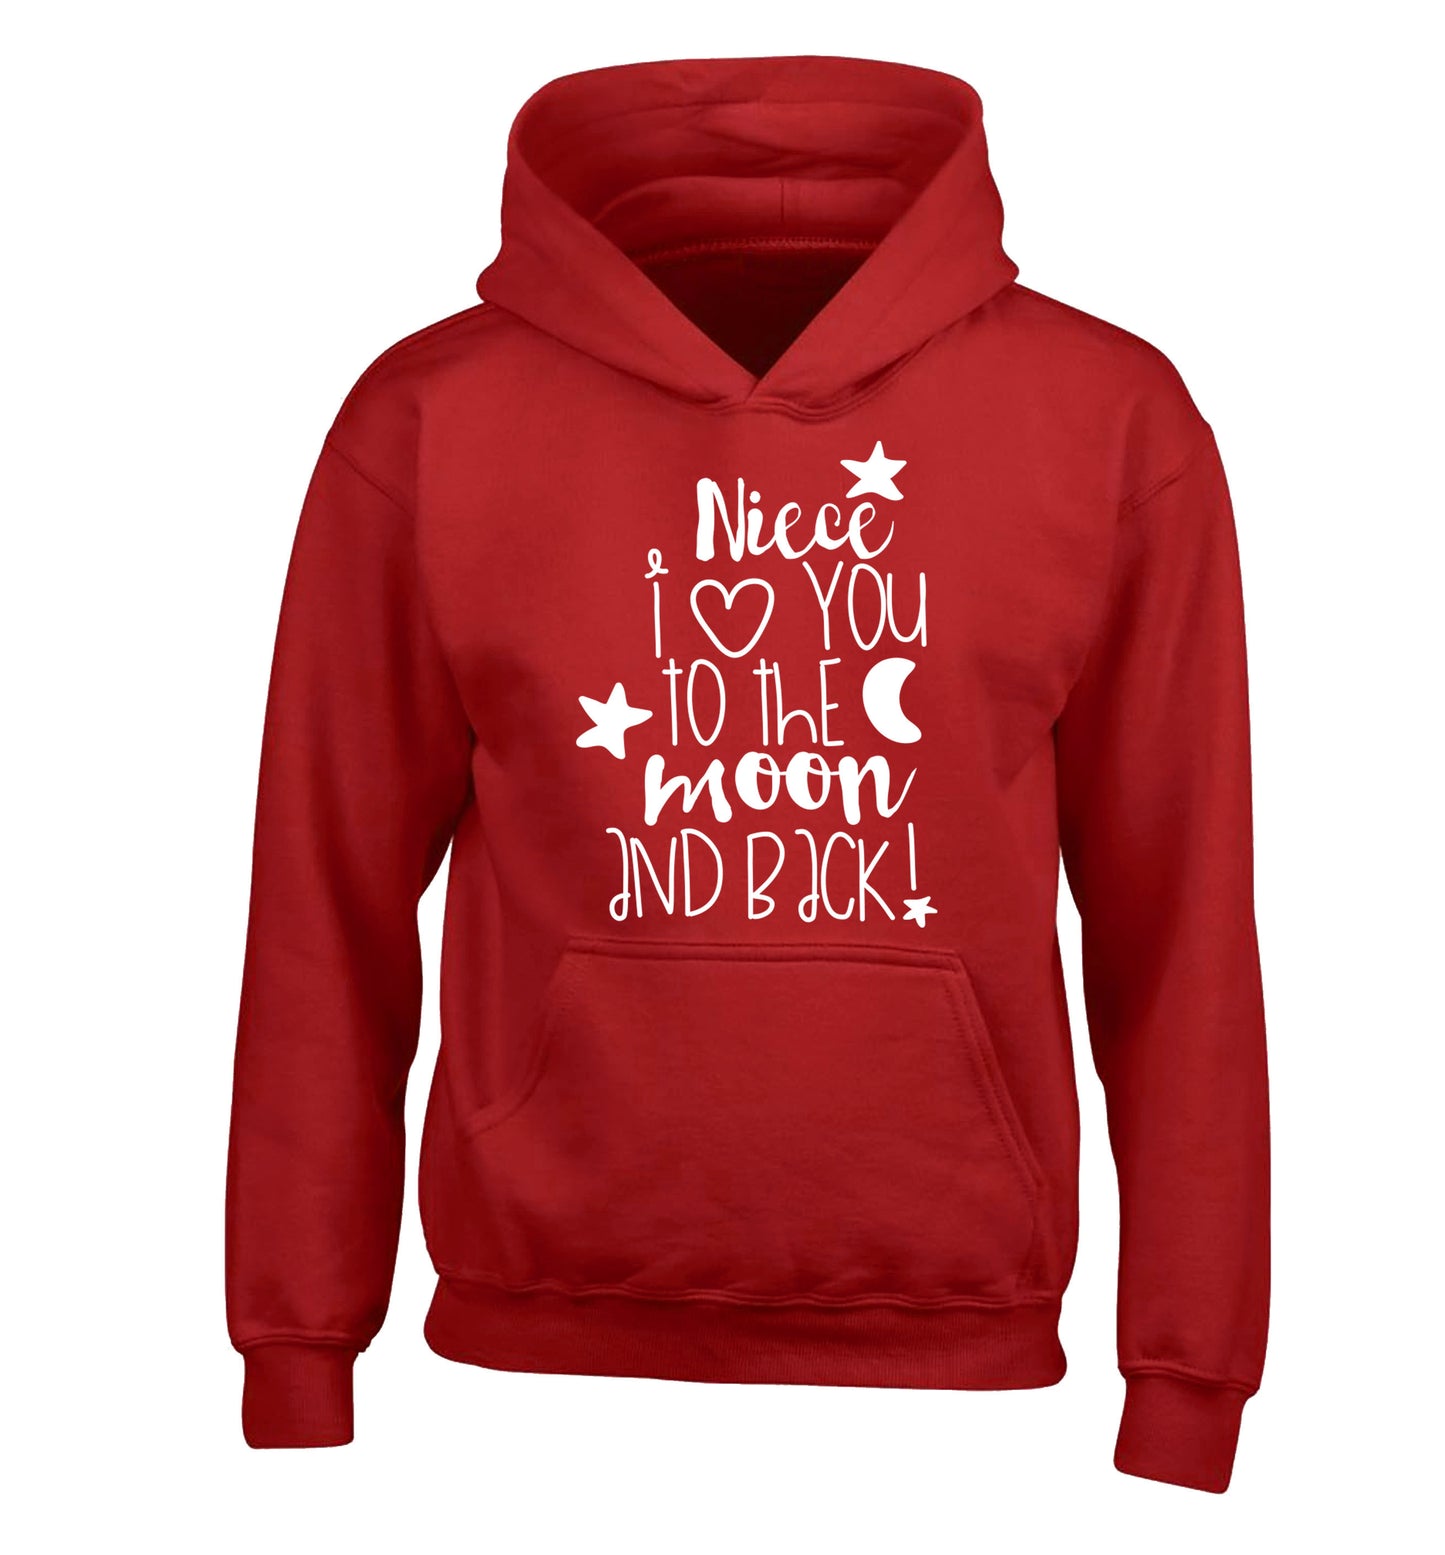 Niece I love you to the moon and back children's red hoodie 12-14 Years